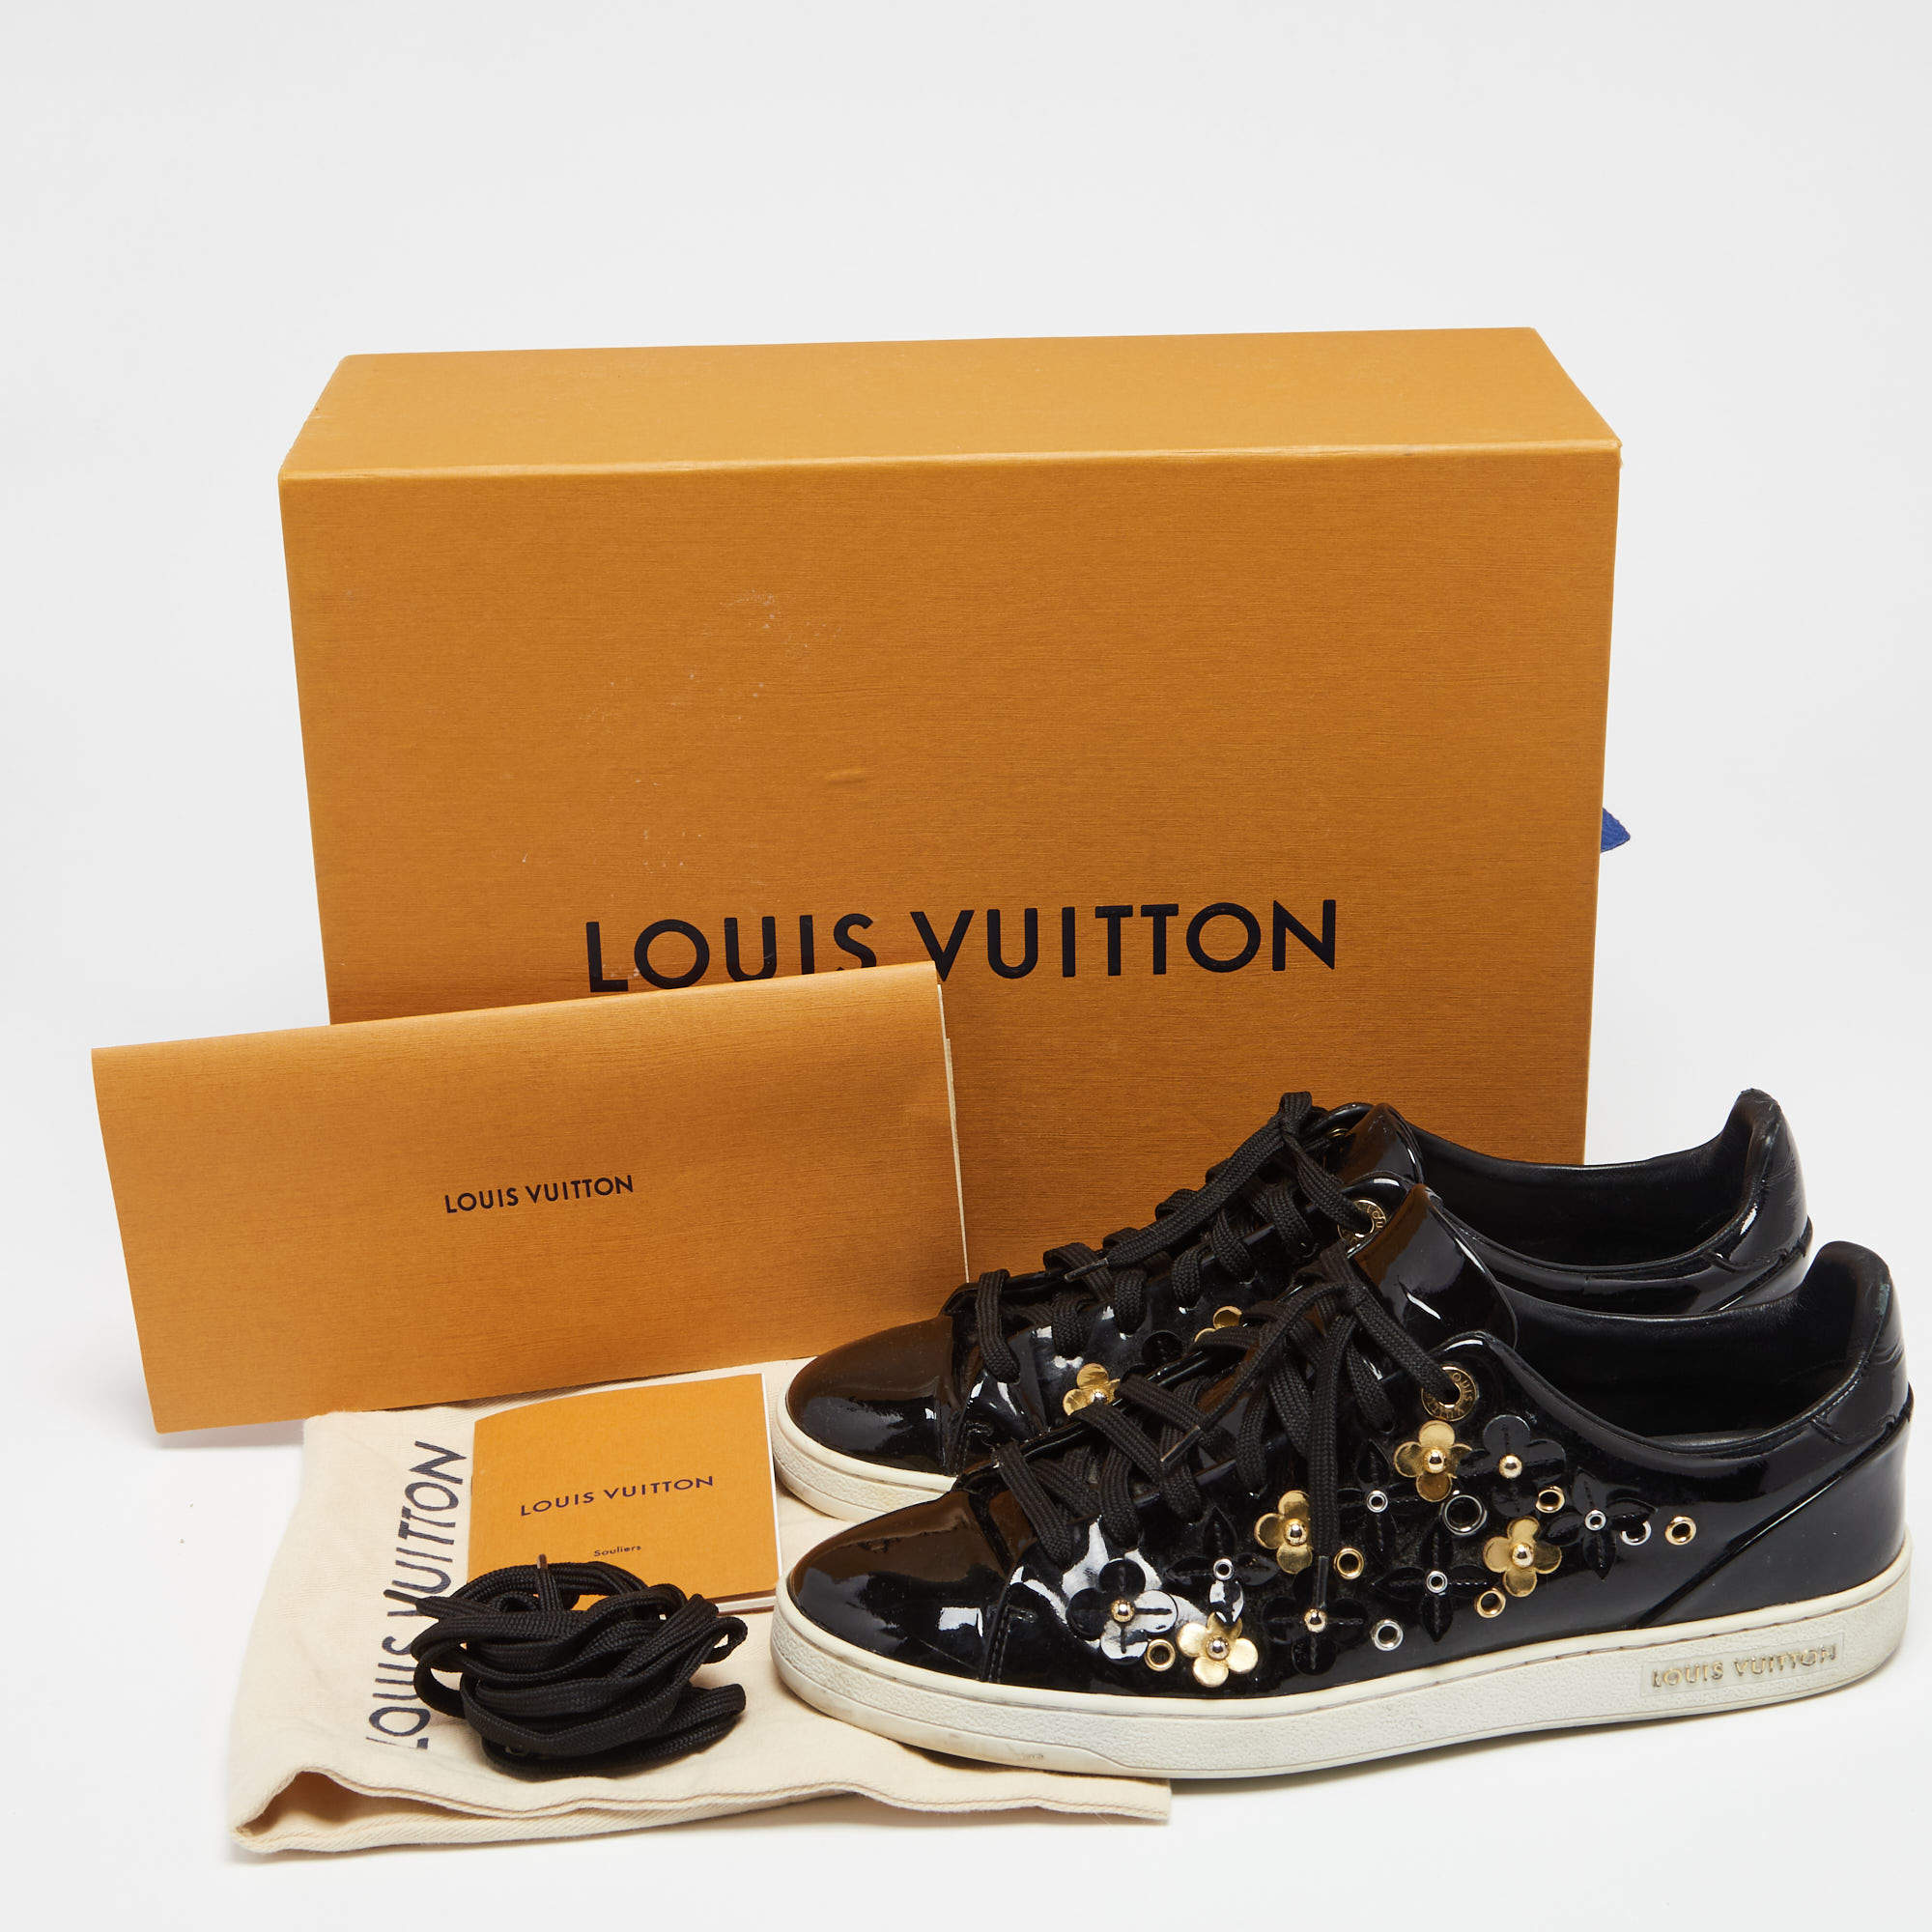 Louis Vuitton Black Patent Leather and Glitter Punchy Sneakers Size 9.5/40  - Yoogi's Closet